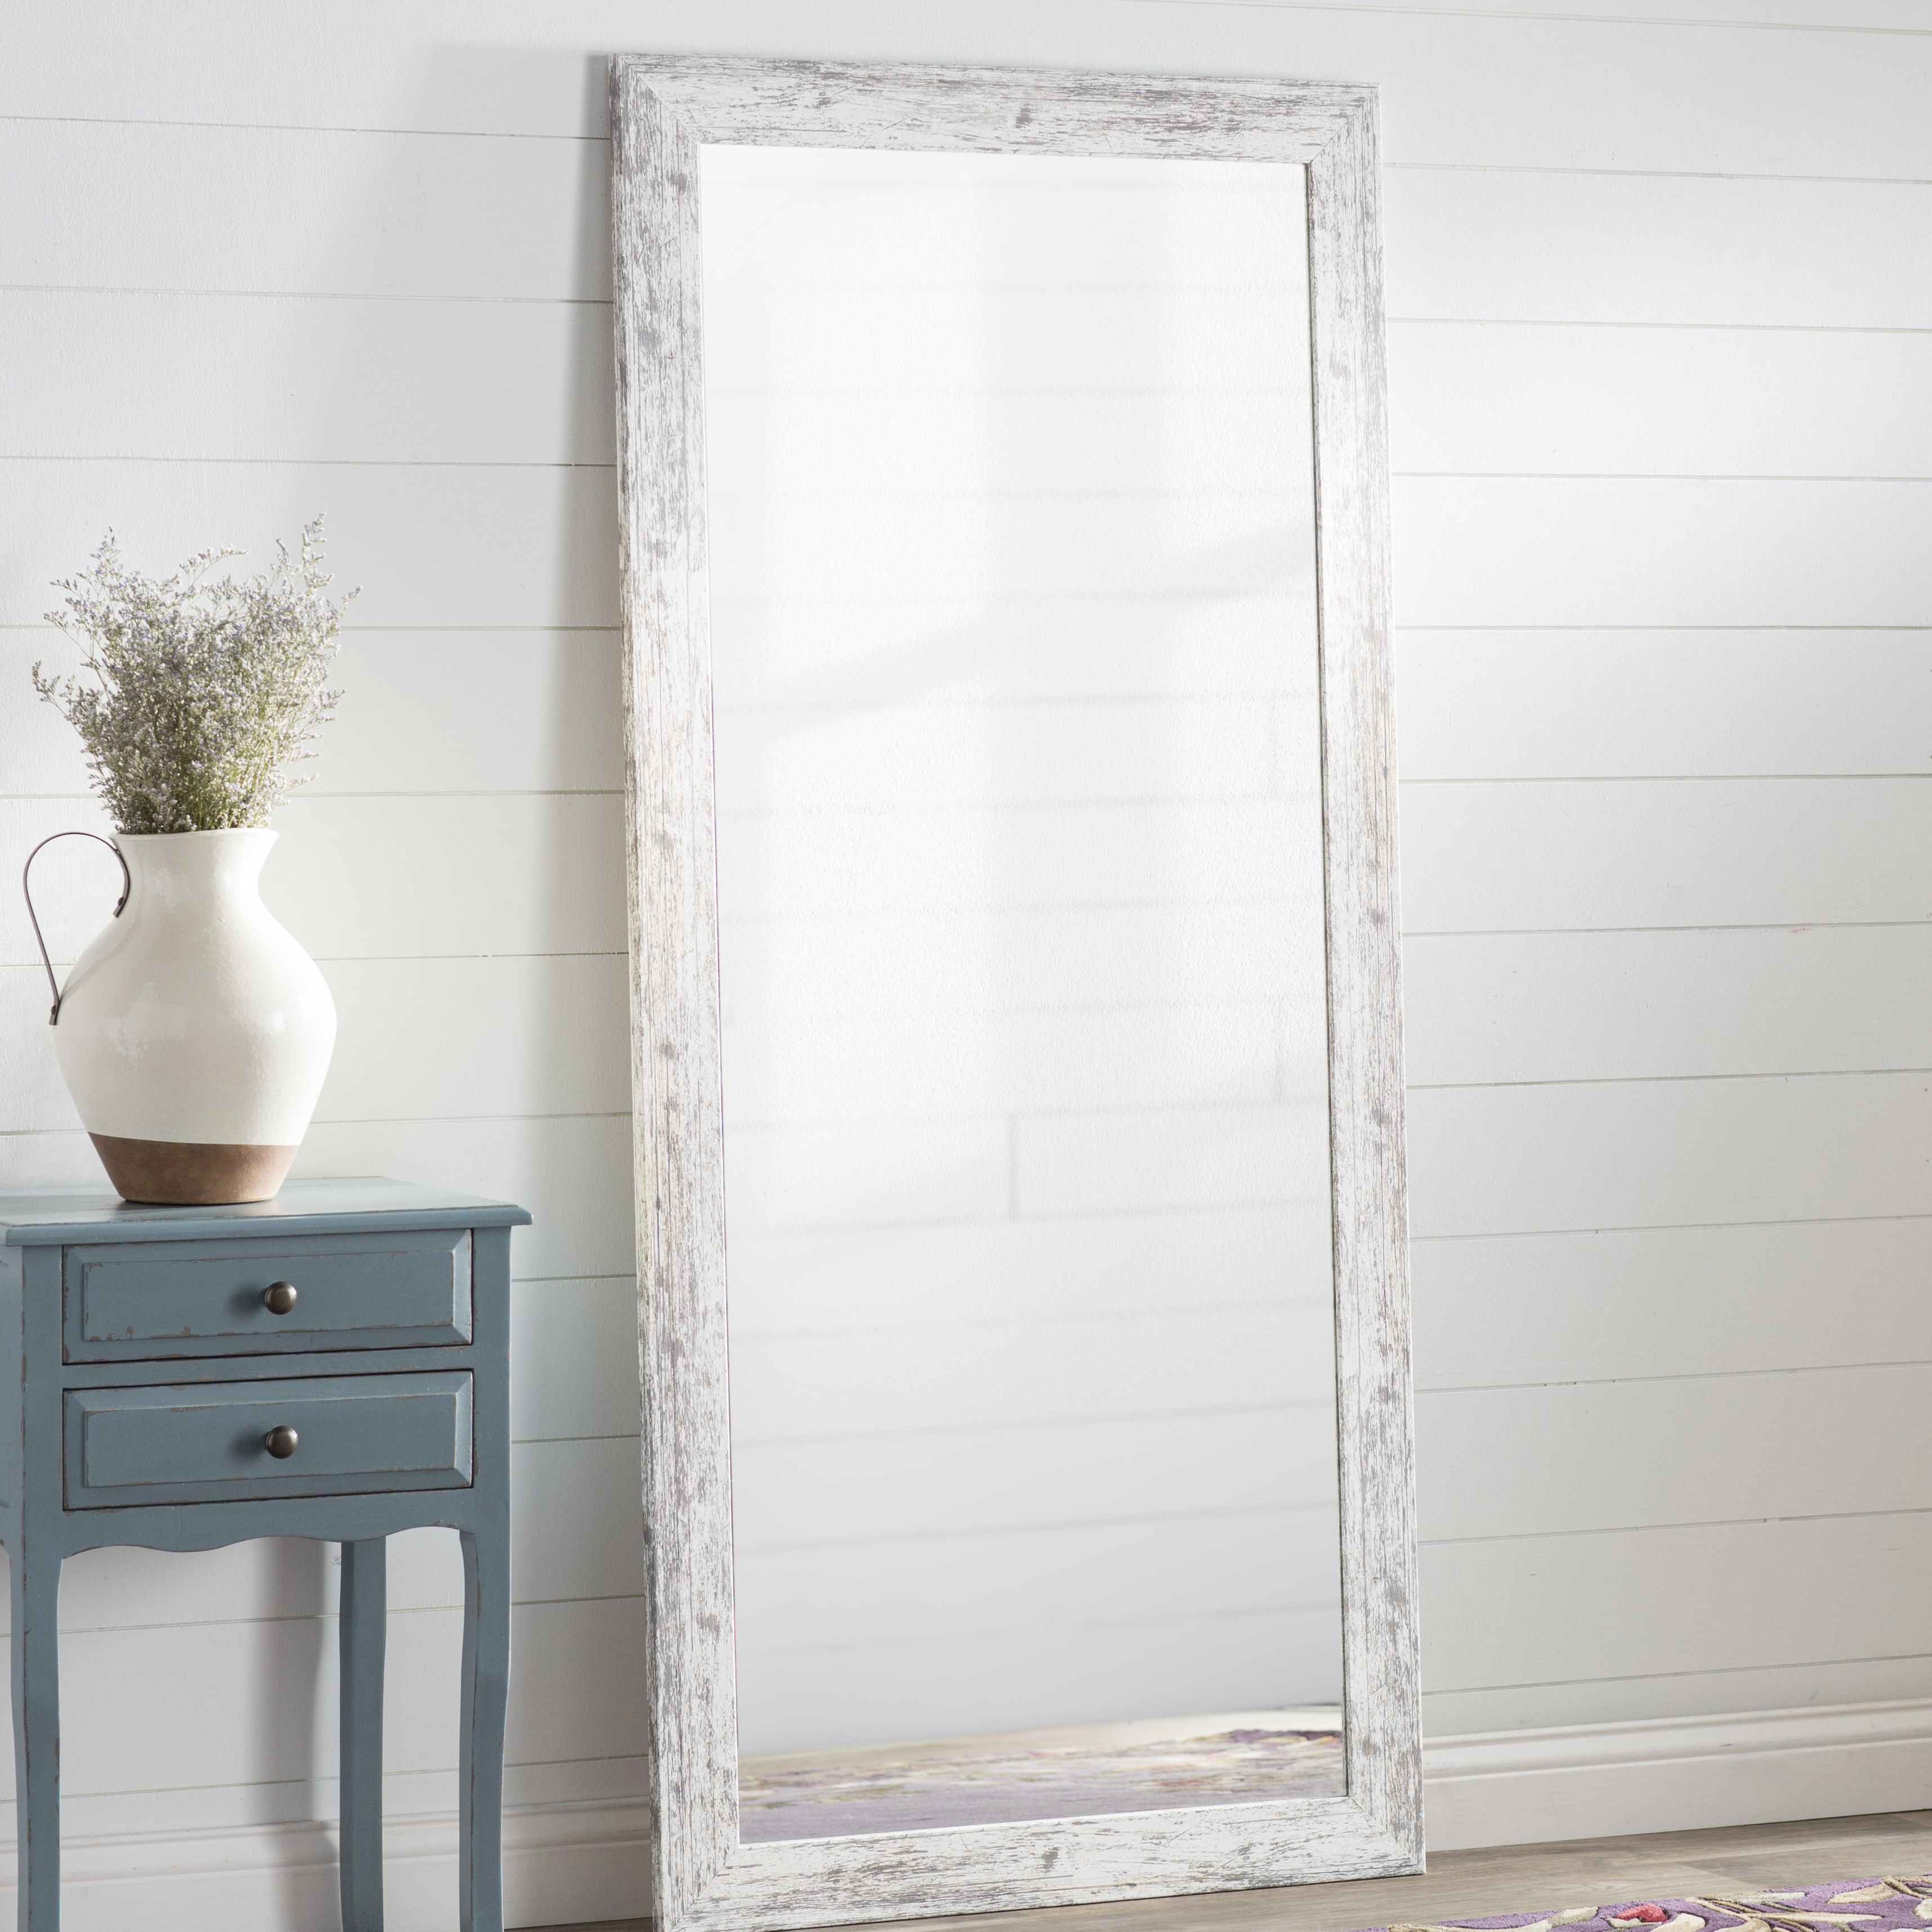 Fashionable Handcrafted Farmhouse Full Length Mirror With Regard To Handcrafted Farmhouse Full Length Mirrors (View 1 of 20)